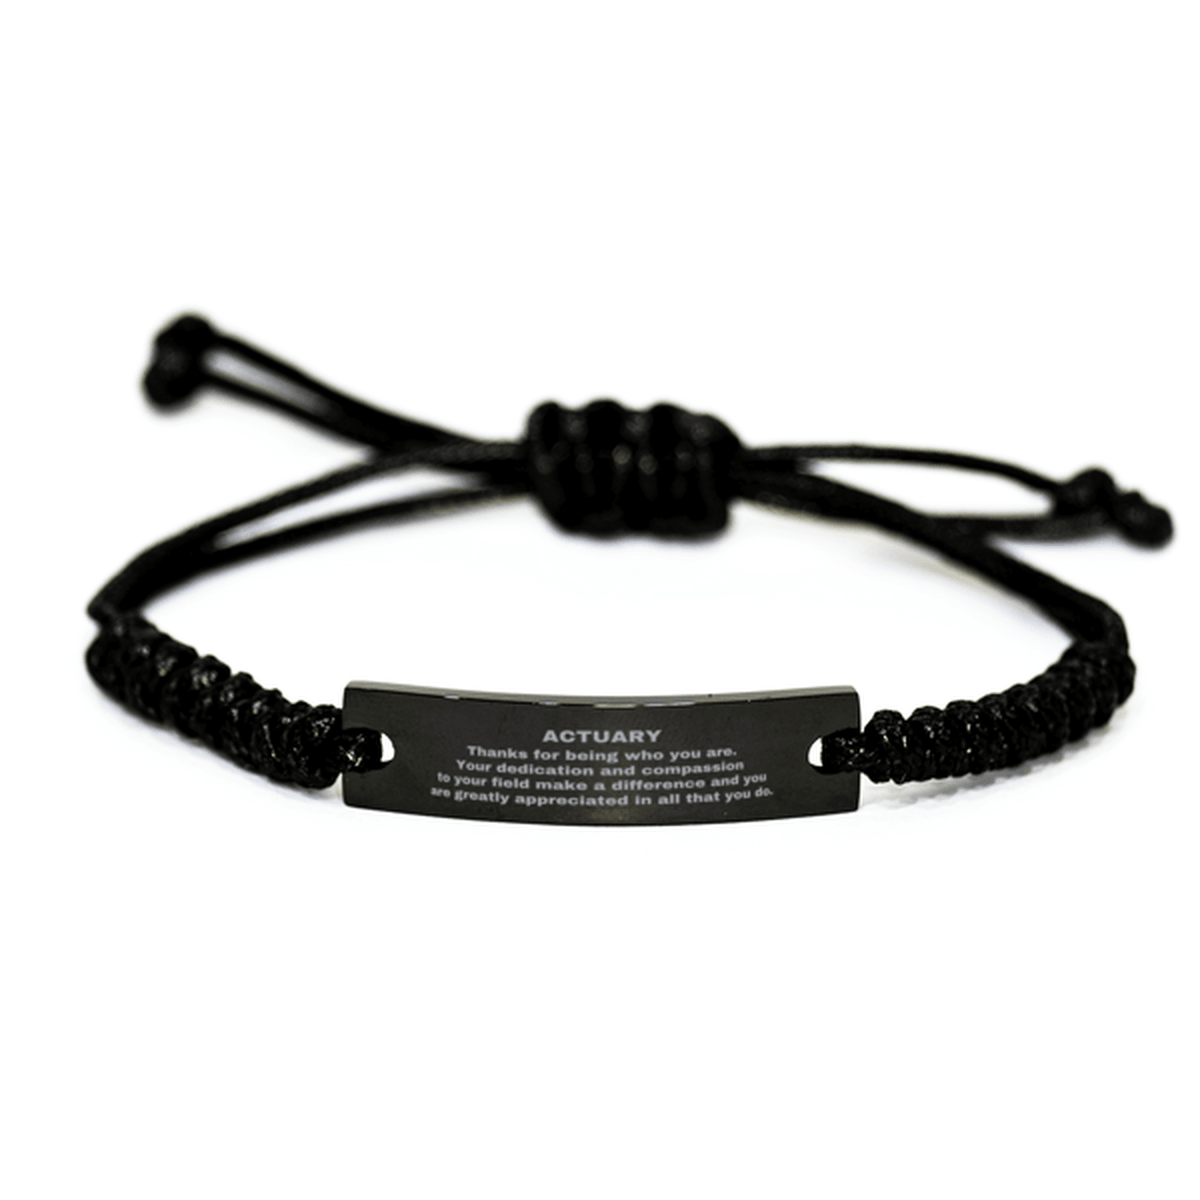 Actuary Black Braided Leather Rope Engraved Bracelet - Thanks for being who you are - Birthday Christmas Jewelry Gifts Coworkers Colleague Boss - Mallard Moon Gift Shop